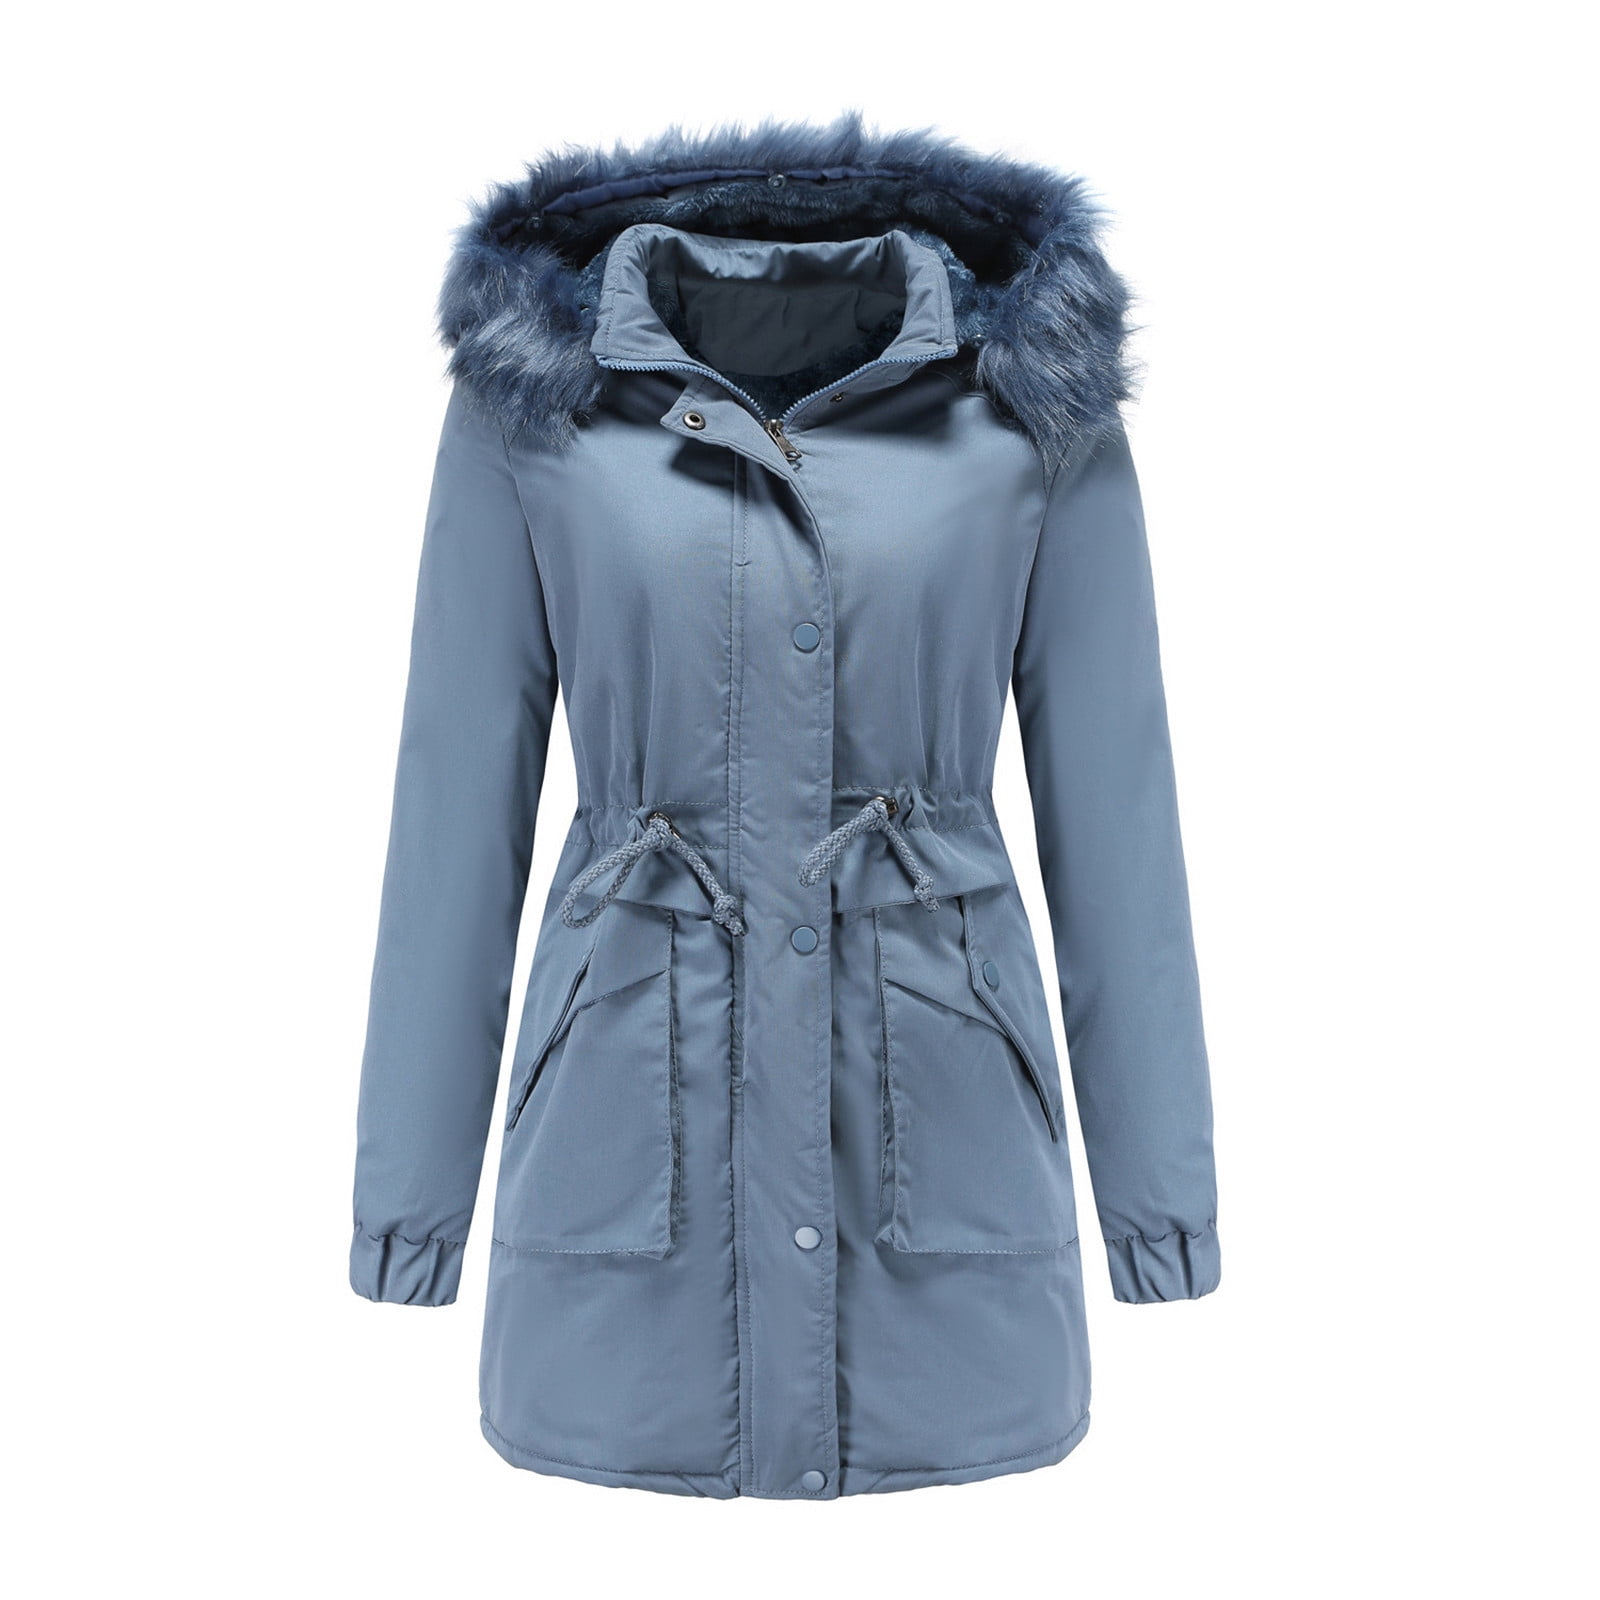 Winter Clothes for Women Shaggy Sherpa Warm Coats Cold Weather Parka Jacket  Casual Plus Size Fur Hood Tunic Outwear 